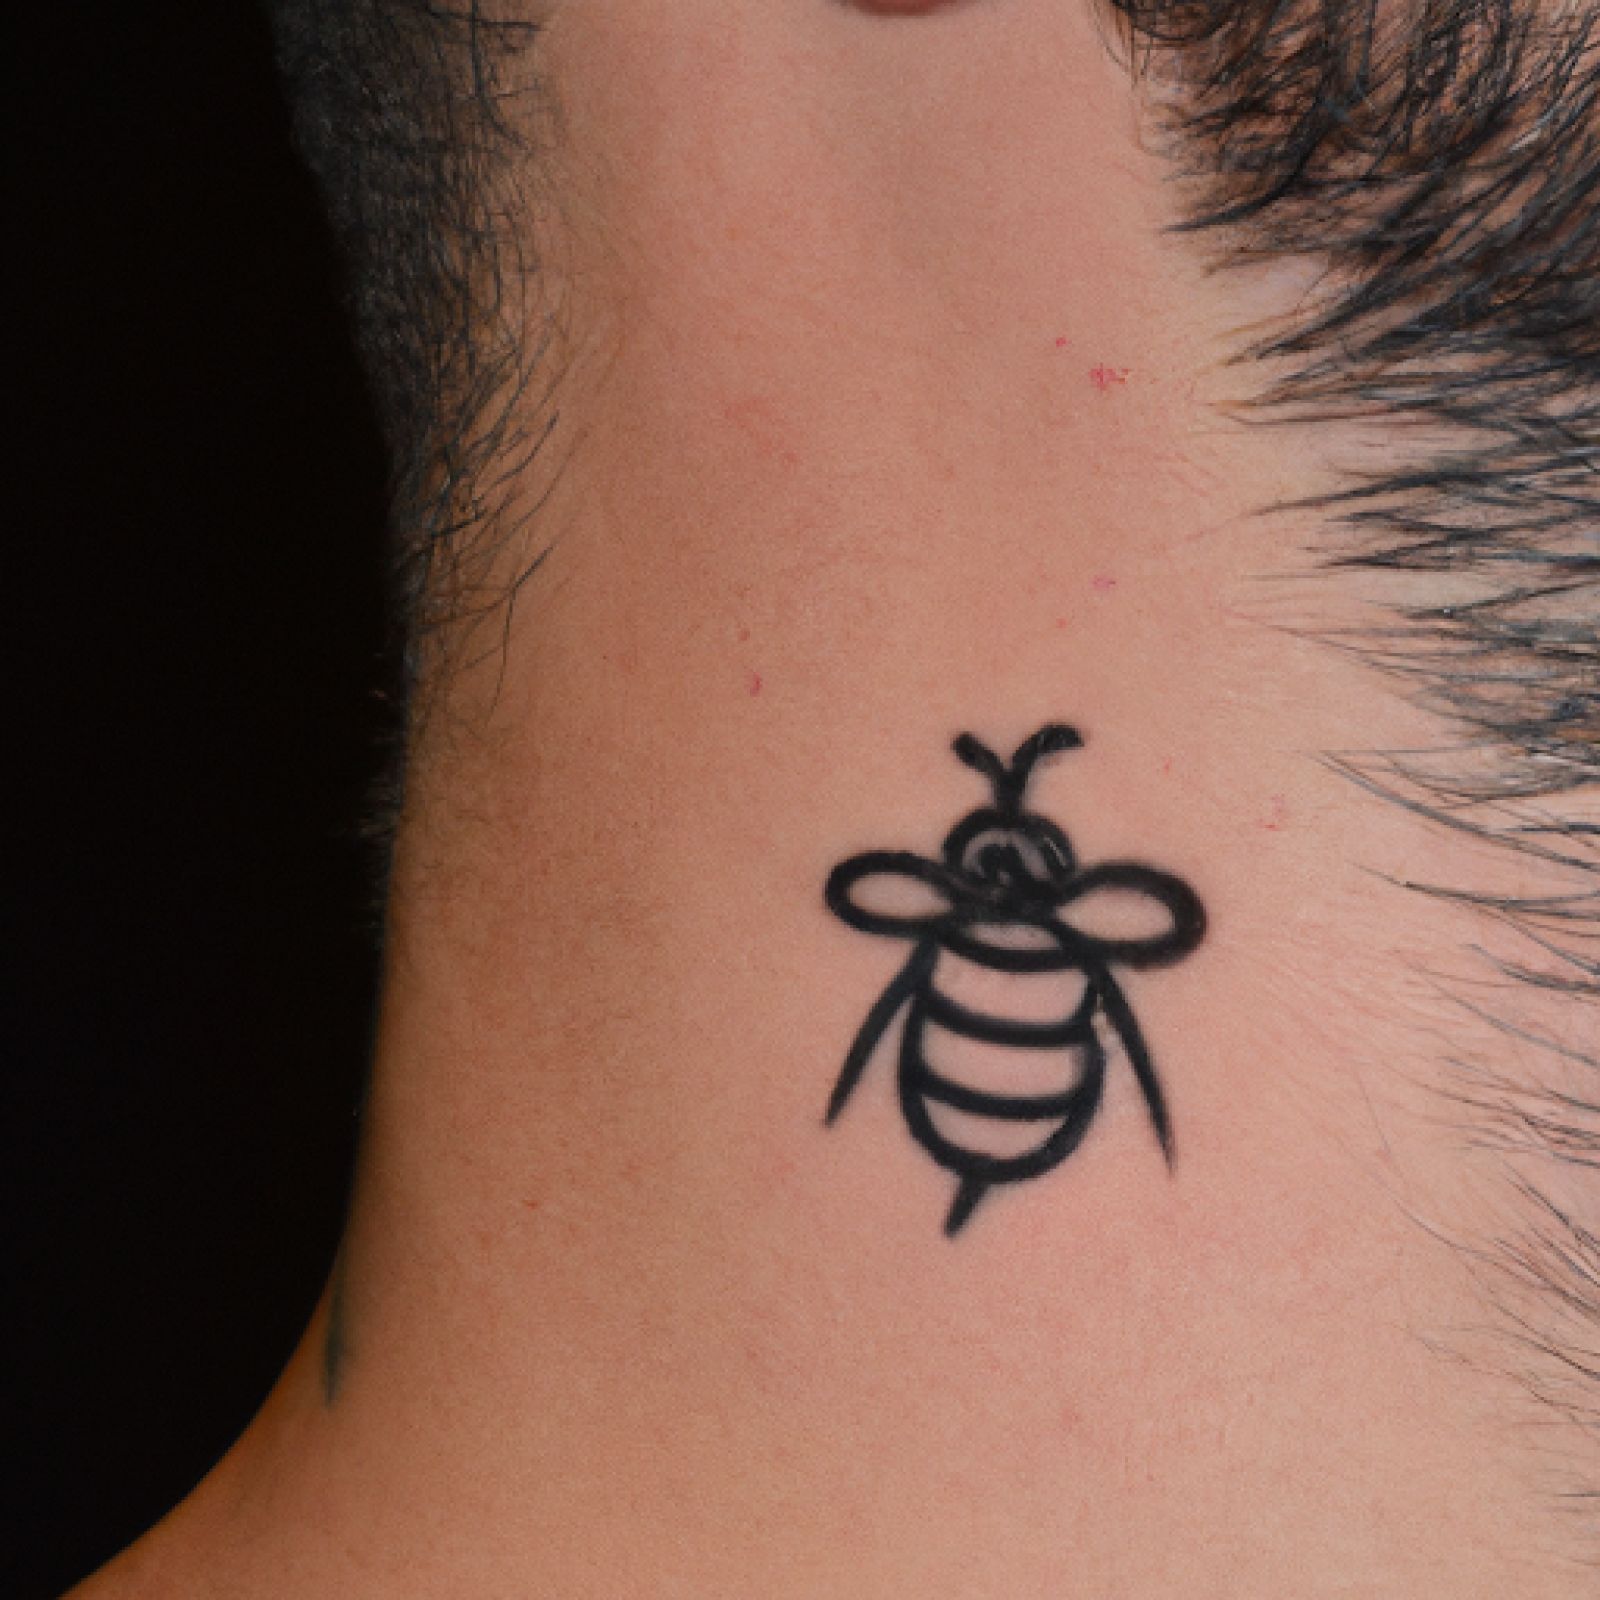 Bee tattoo on neck for men